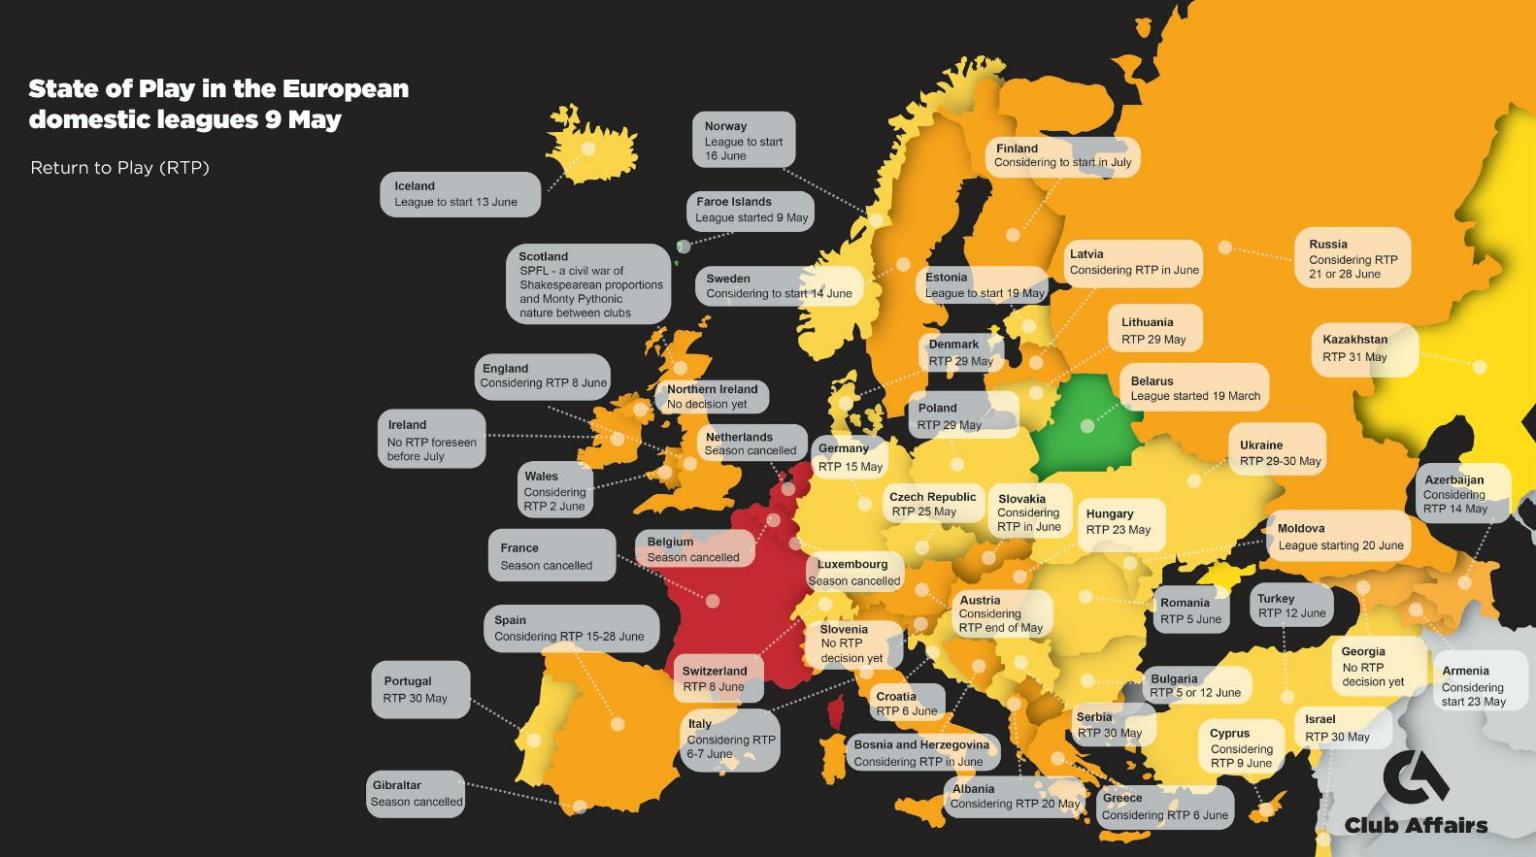 Map of Europe with live event statuses on 9 May 2020